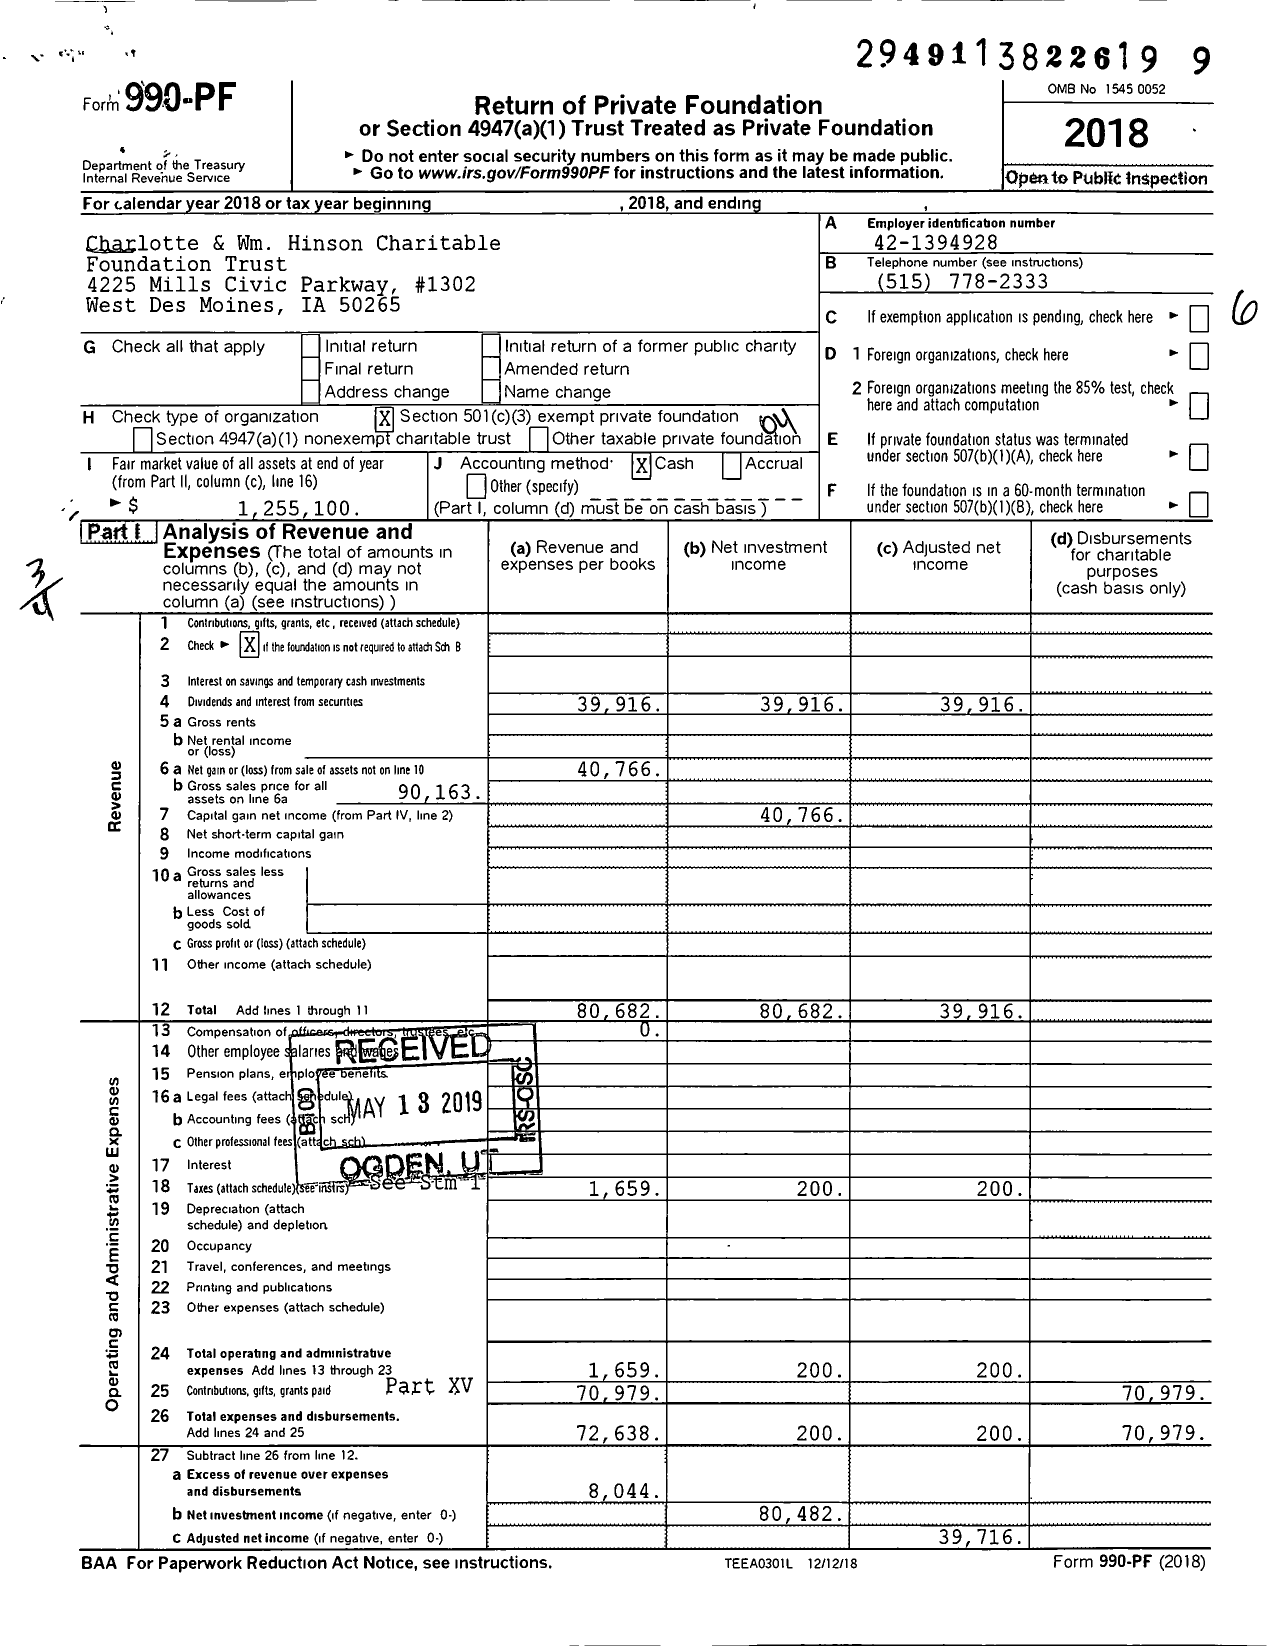 Image of first page of 2018 Form 990PF for Charlotte and William Hinson Charitable Foundation Trust